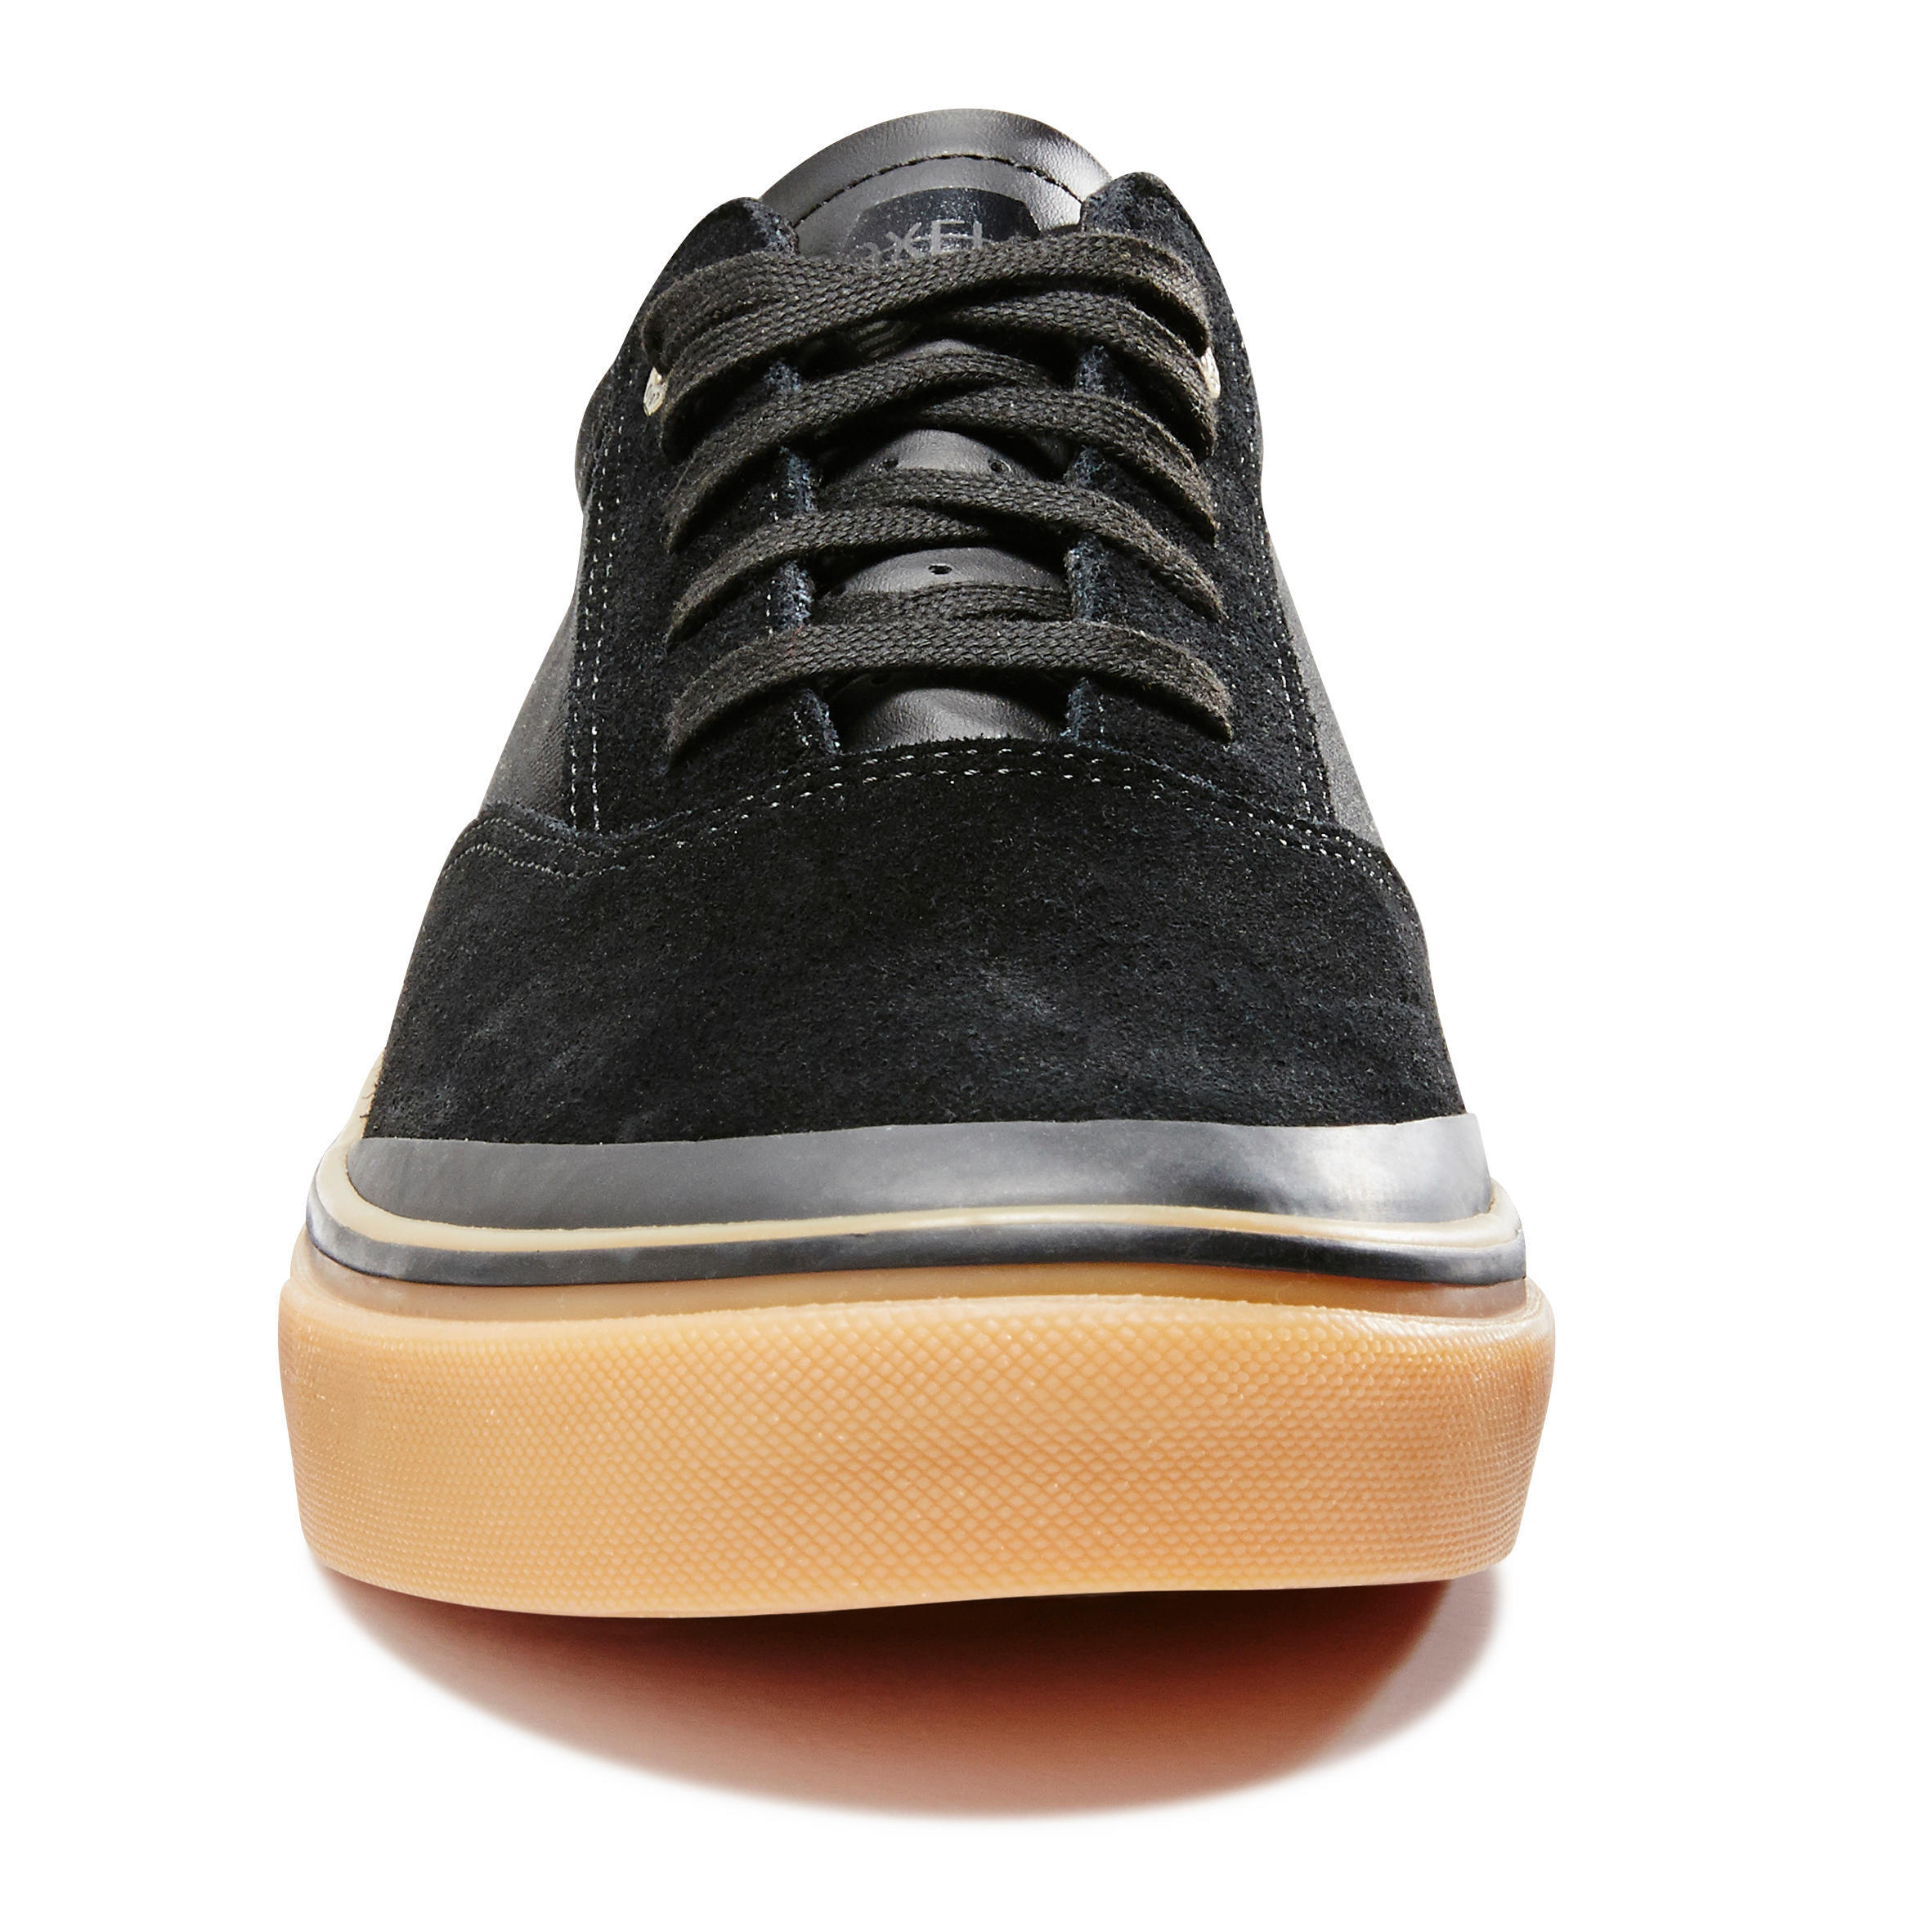 Vulca 500 Adult Low-Top Skate Shoes - Black/Rubber Sole 4/6